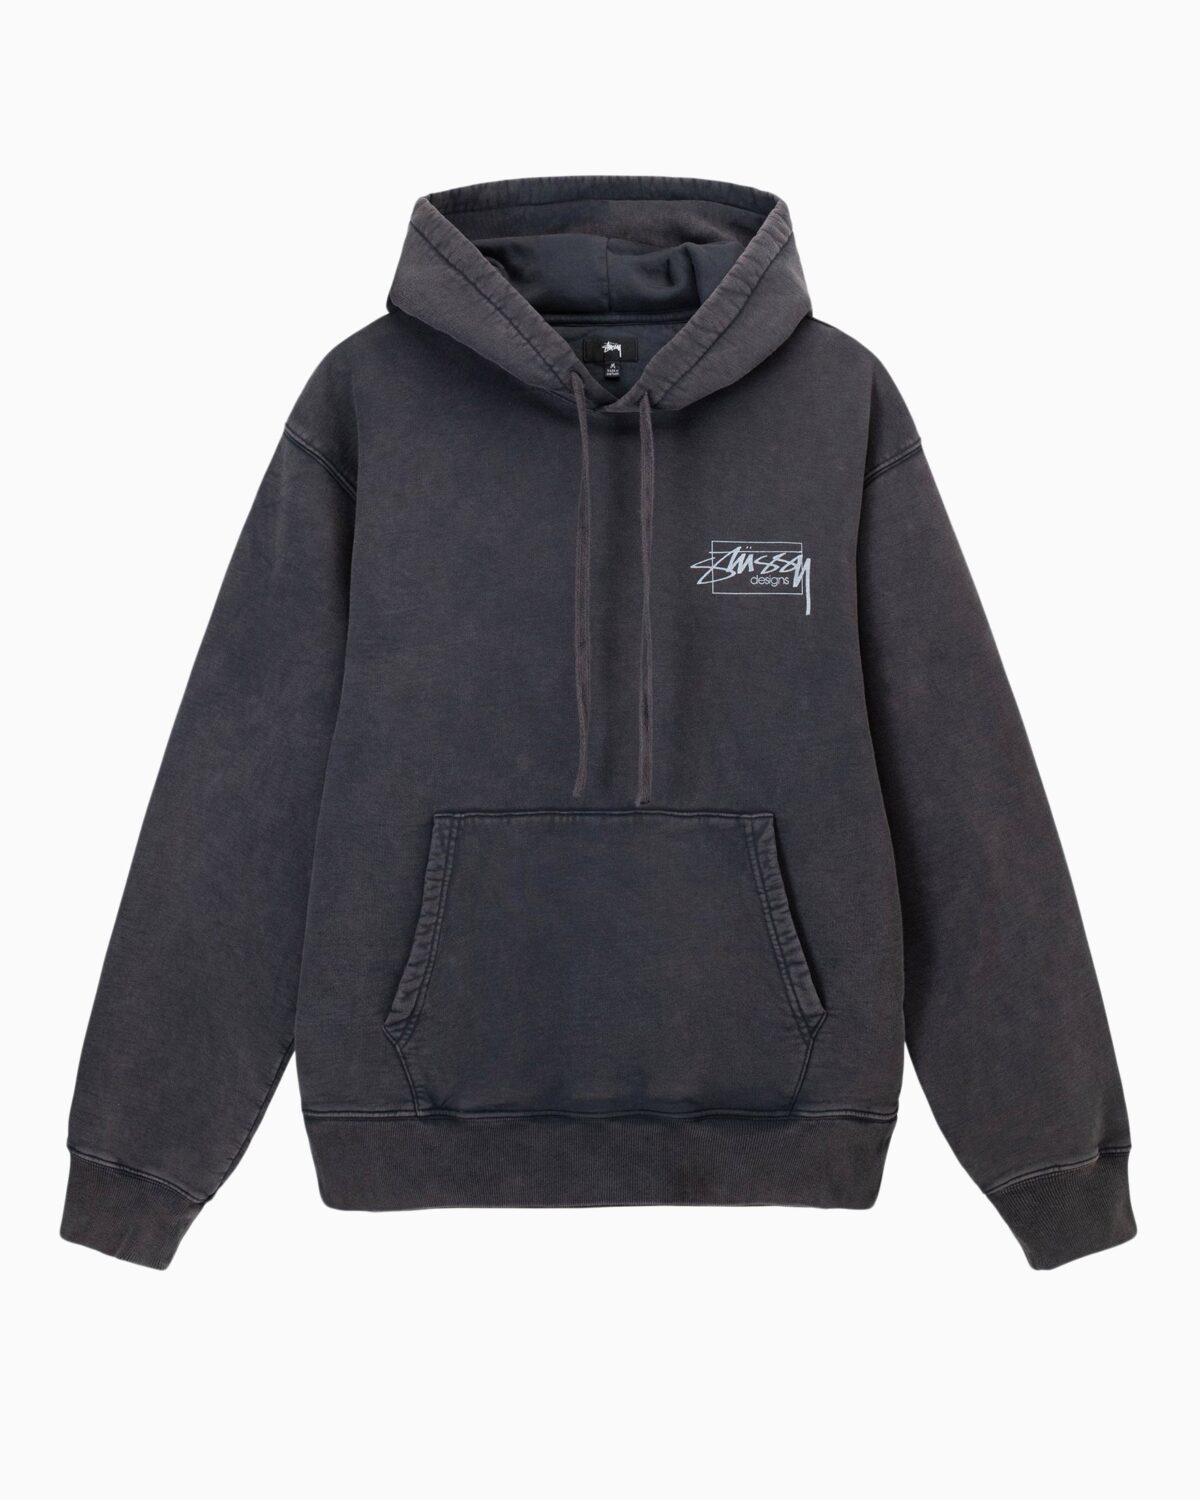 The Art of Comfort: Stylish Stussy Hoodies for Everyday Wear